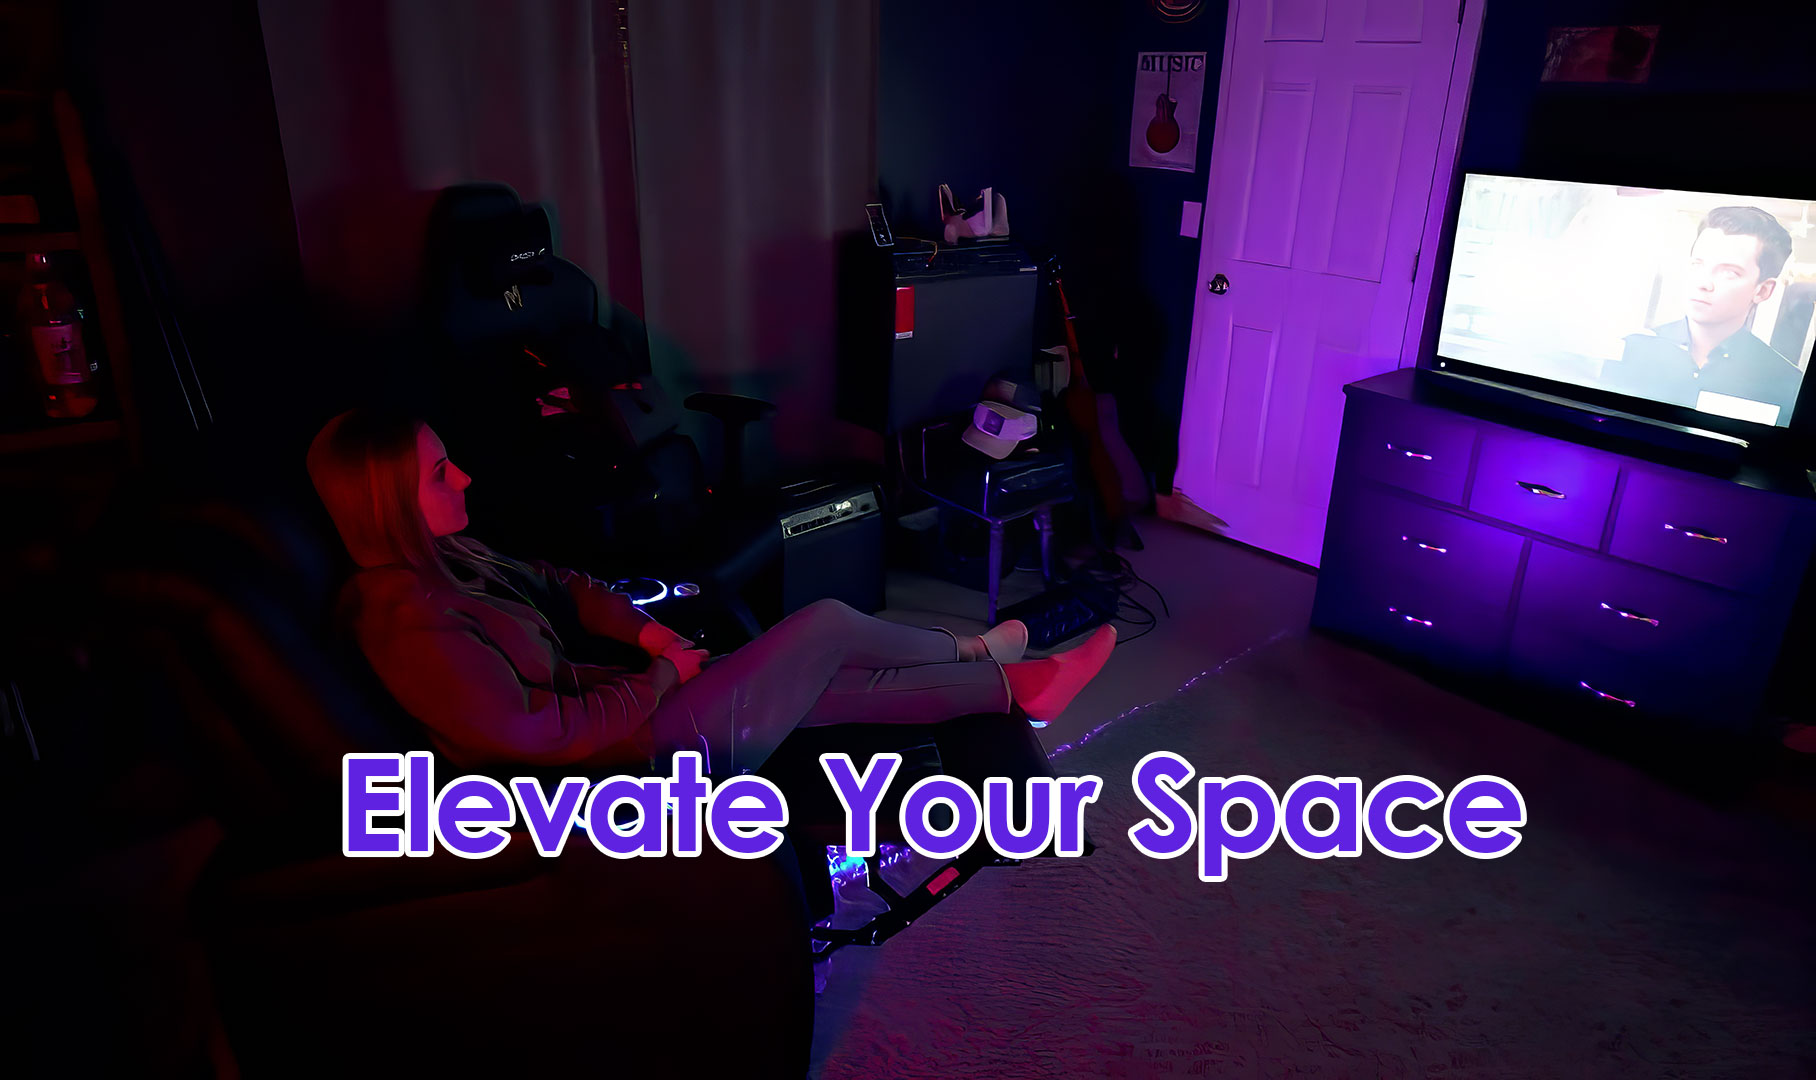 Elevate Your Space: The Ultimate Home Theater Seating for Home, Gaming, and TV?